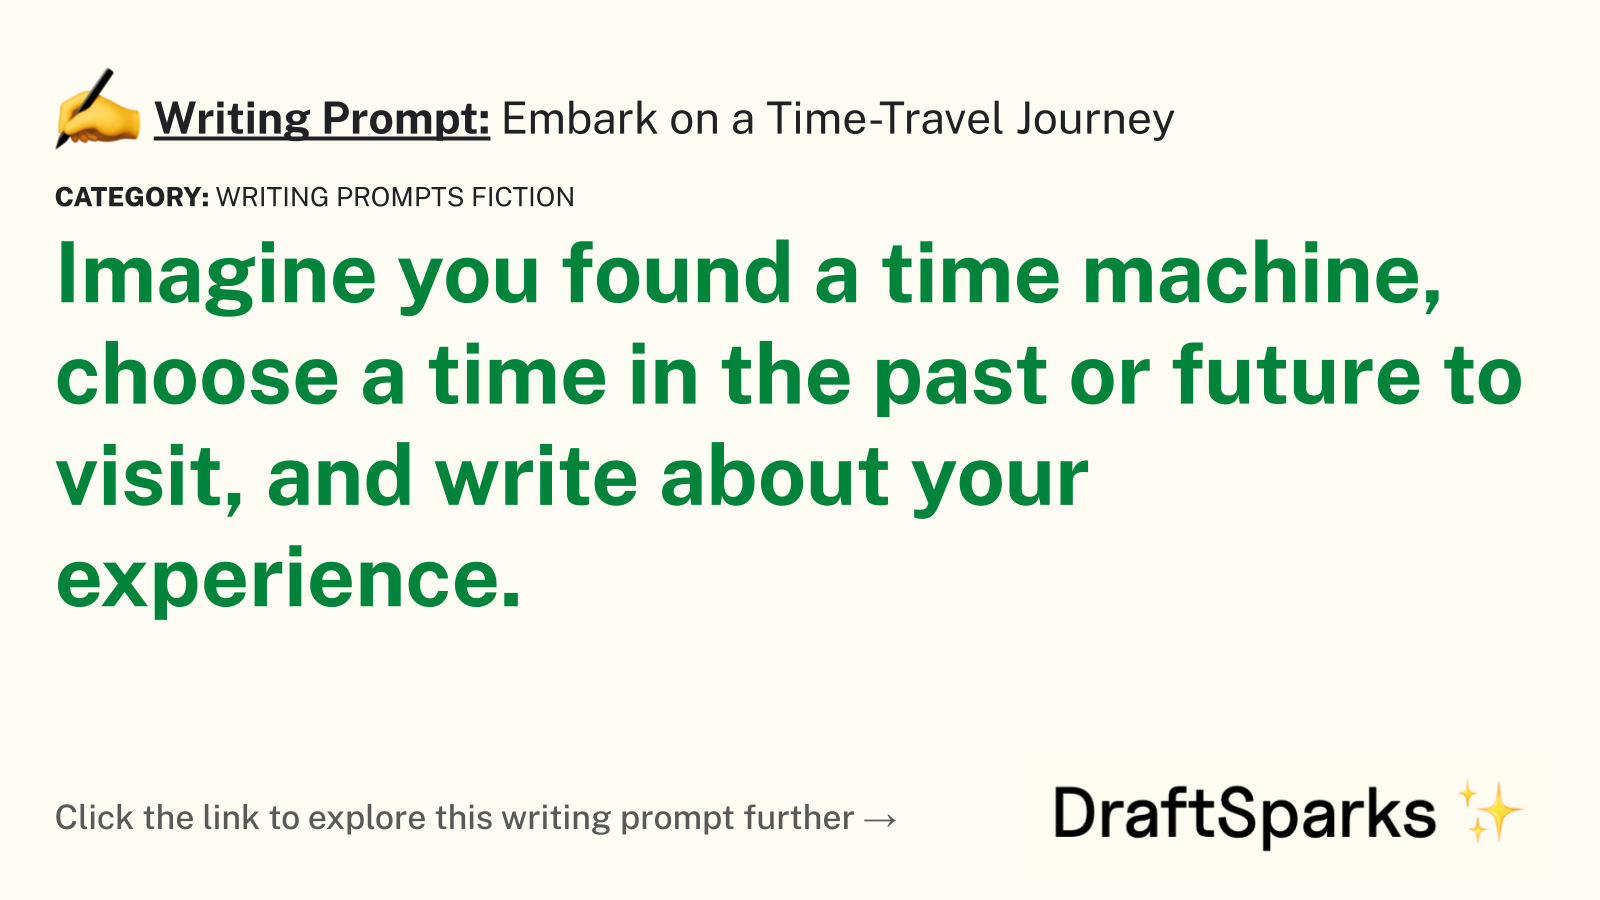 Embark on a Time-Travel Journey